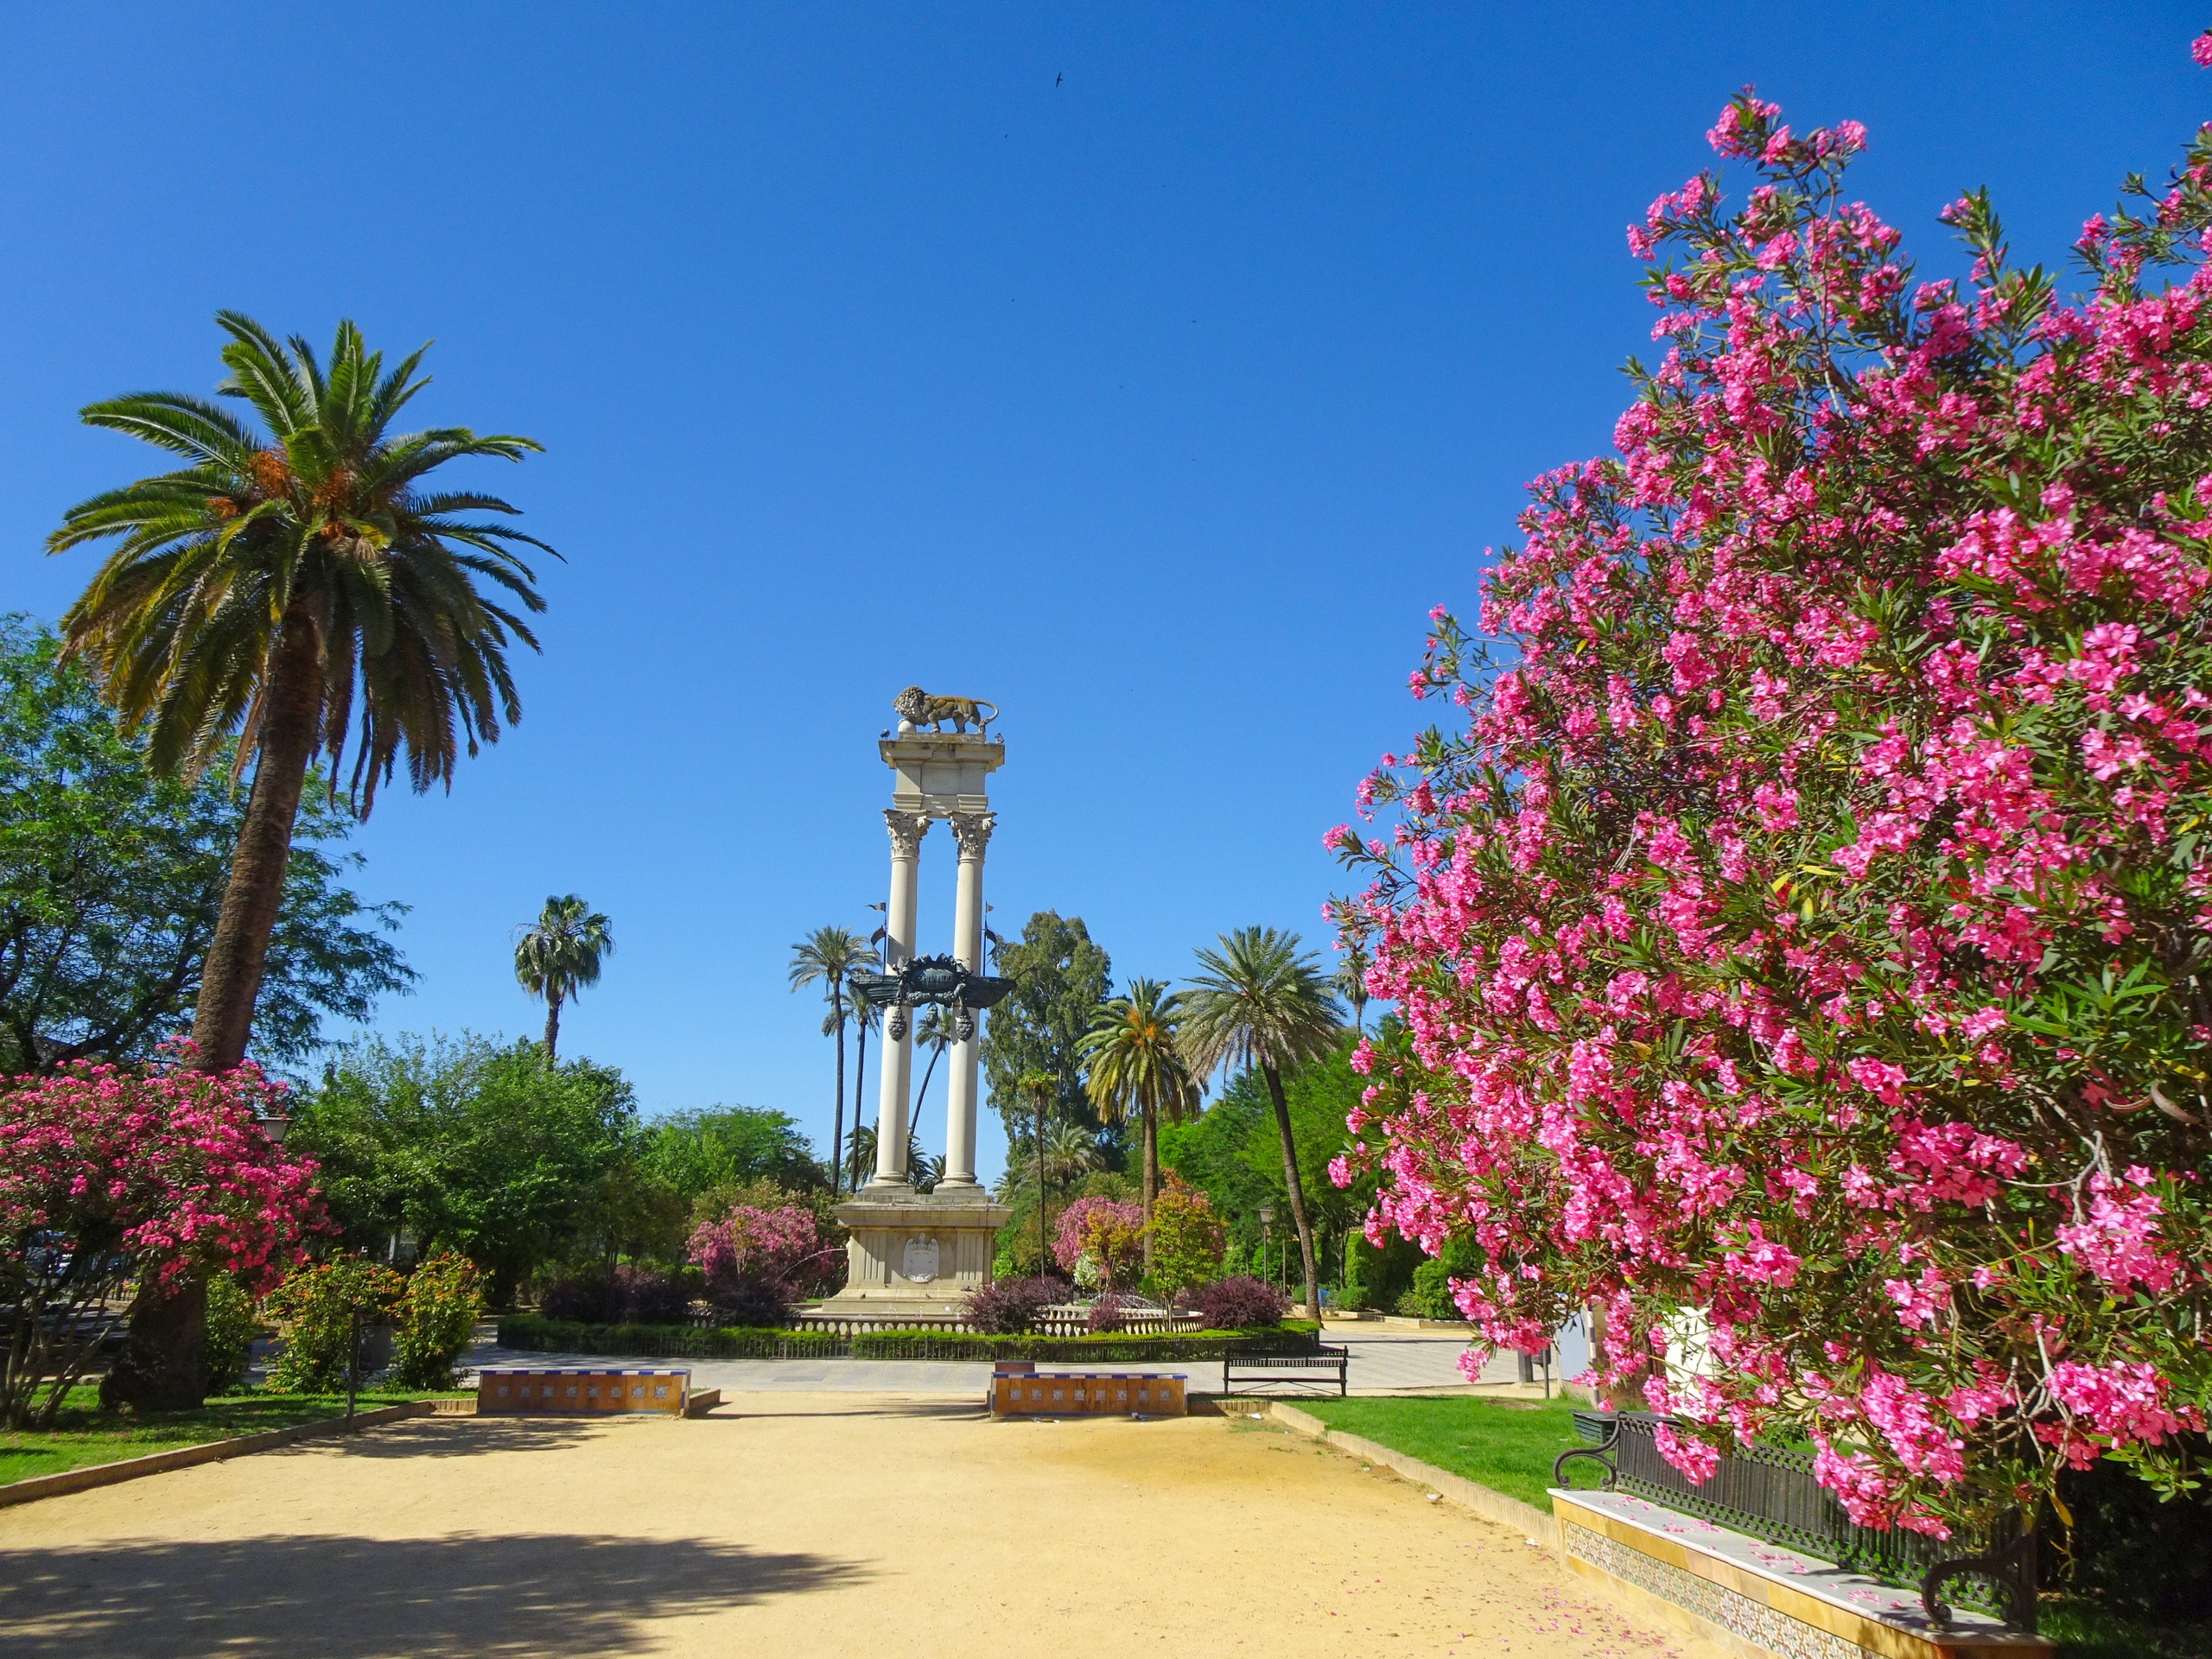 Beautiful gardens in Sevilla, seen while on self-guided biking tour of Andalusia